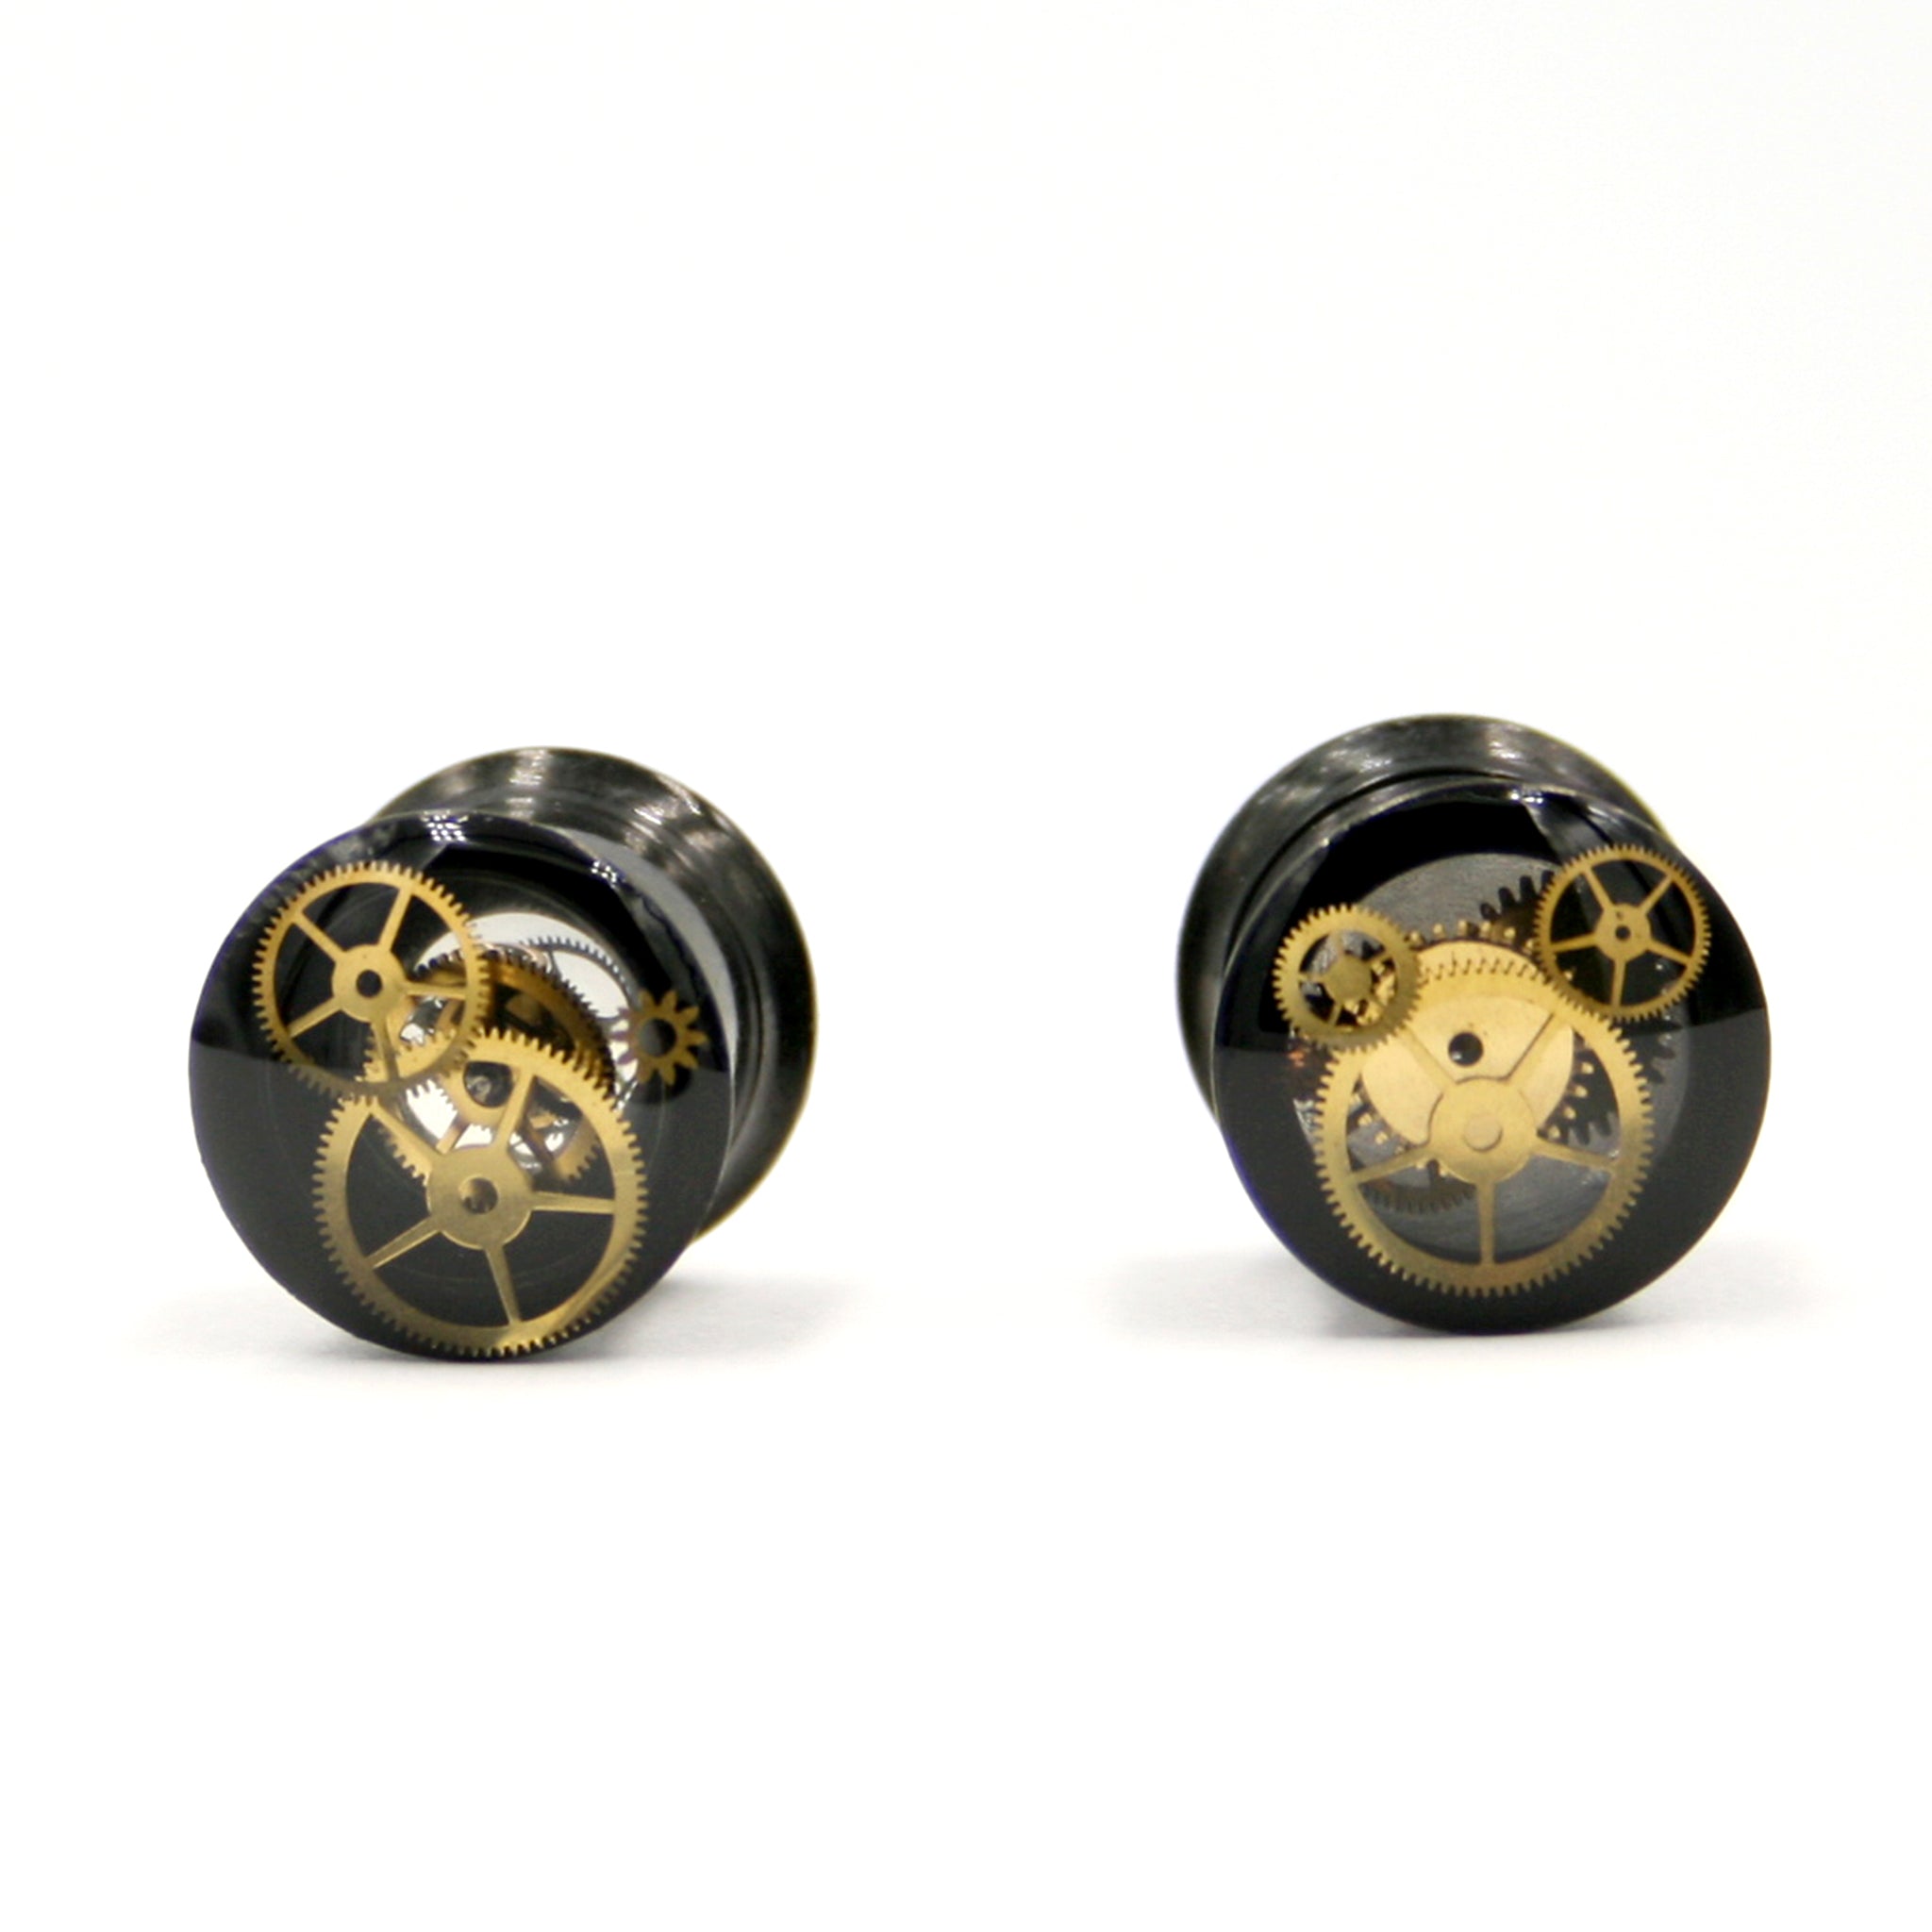 8mm double flare small ear gauges in steampunk style